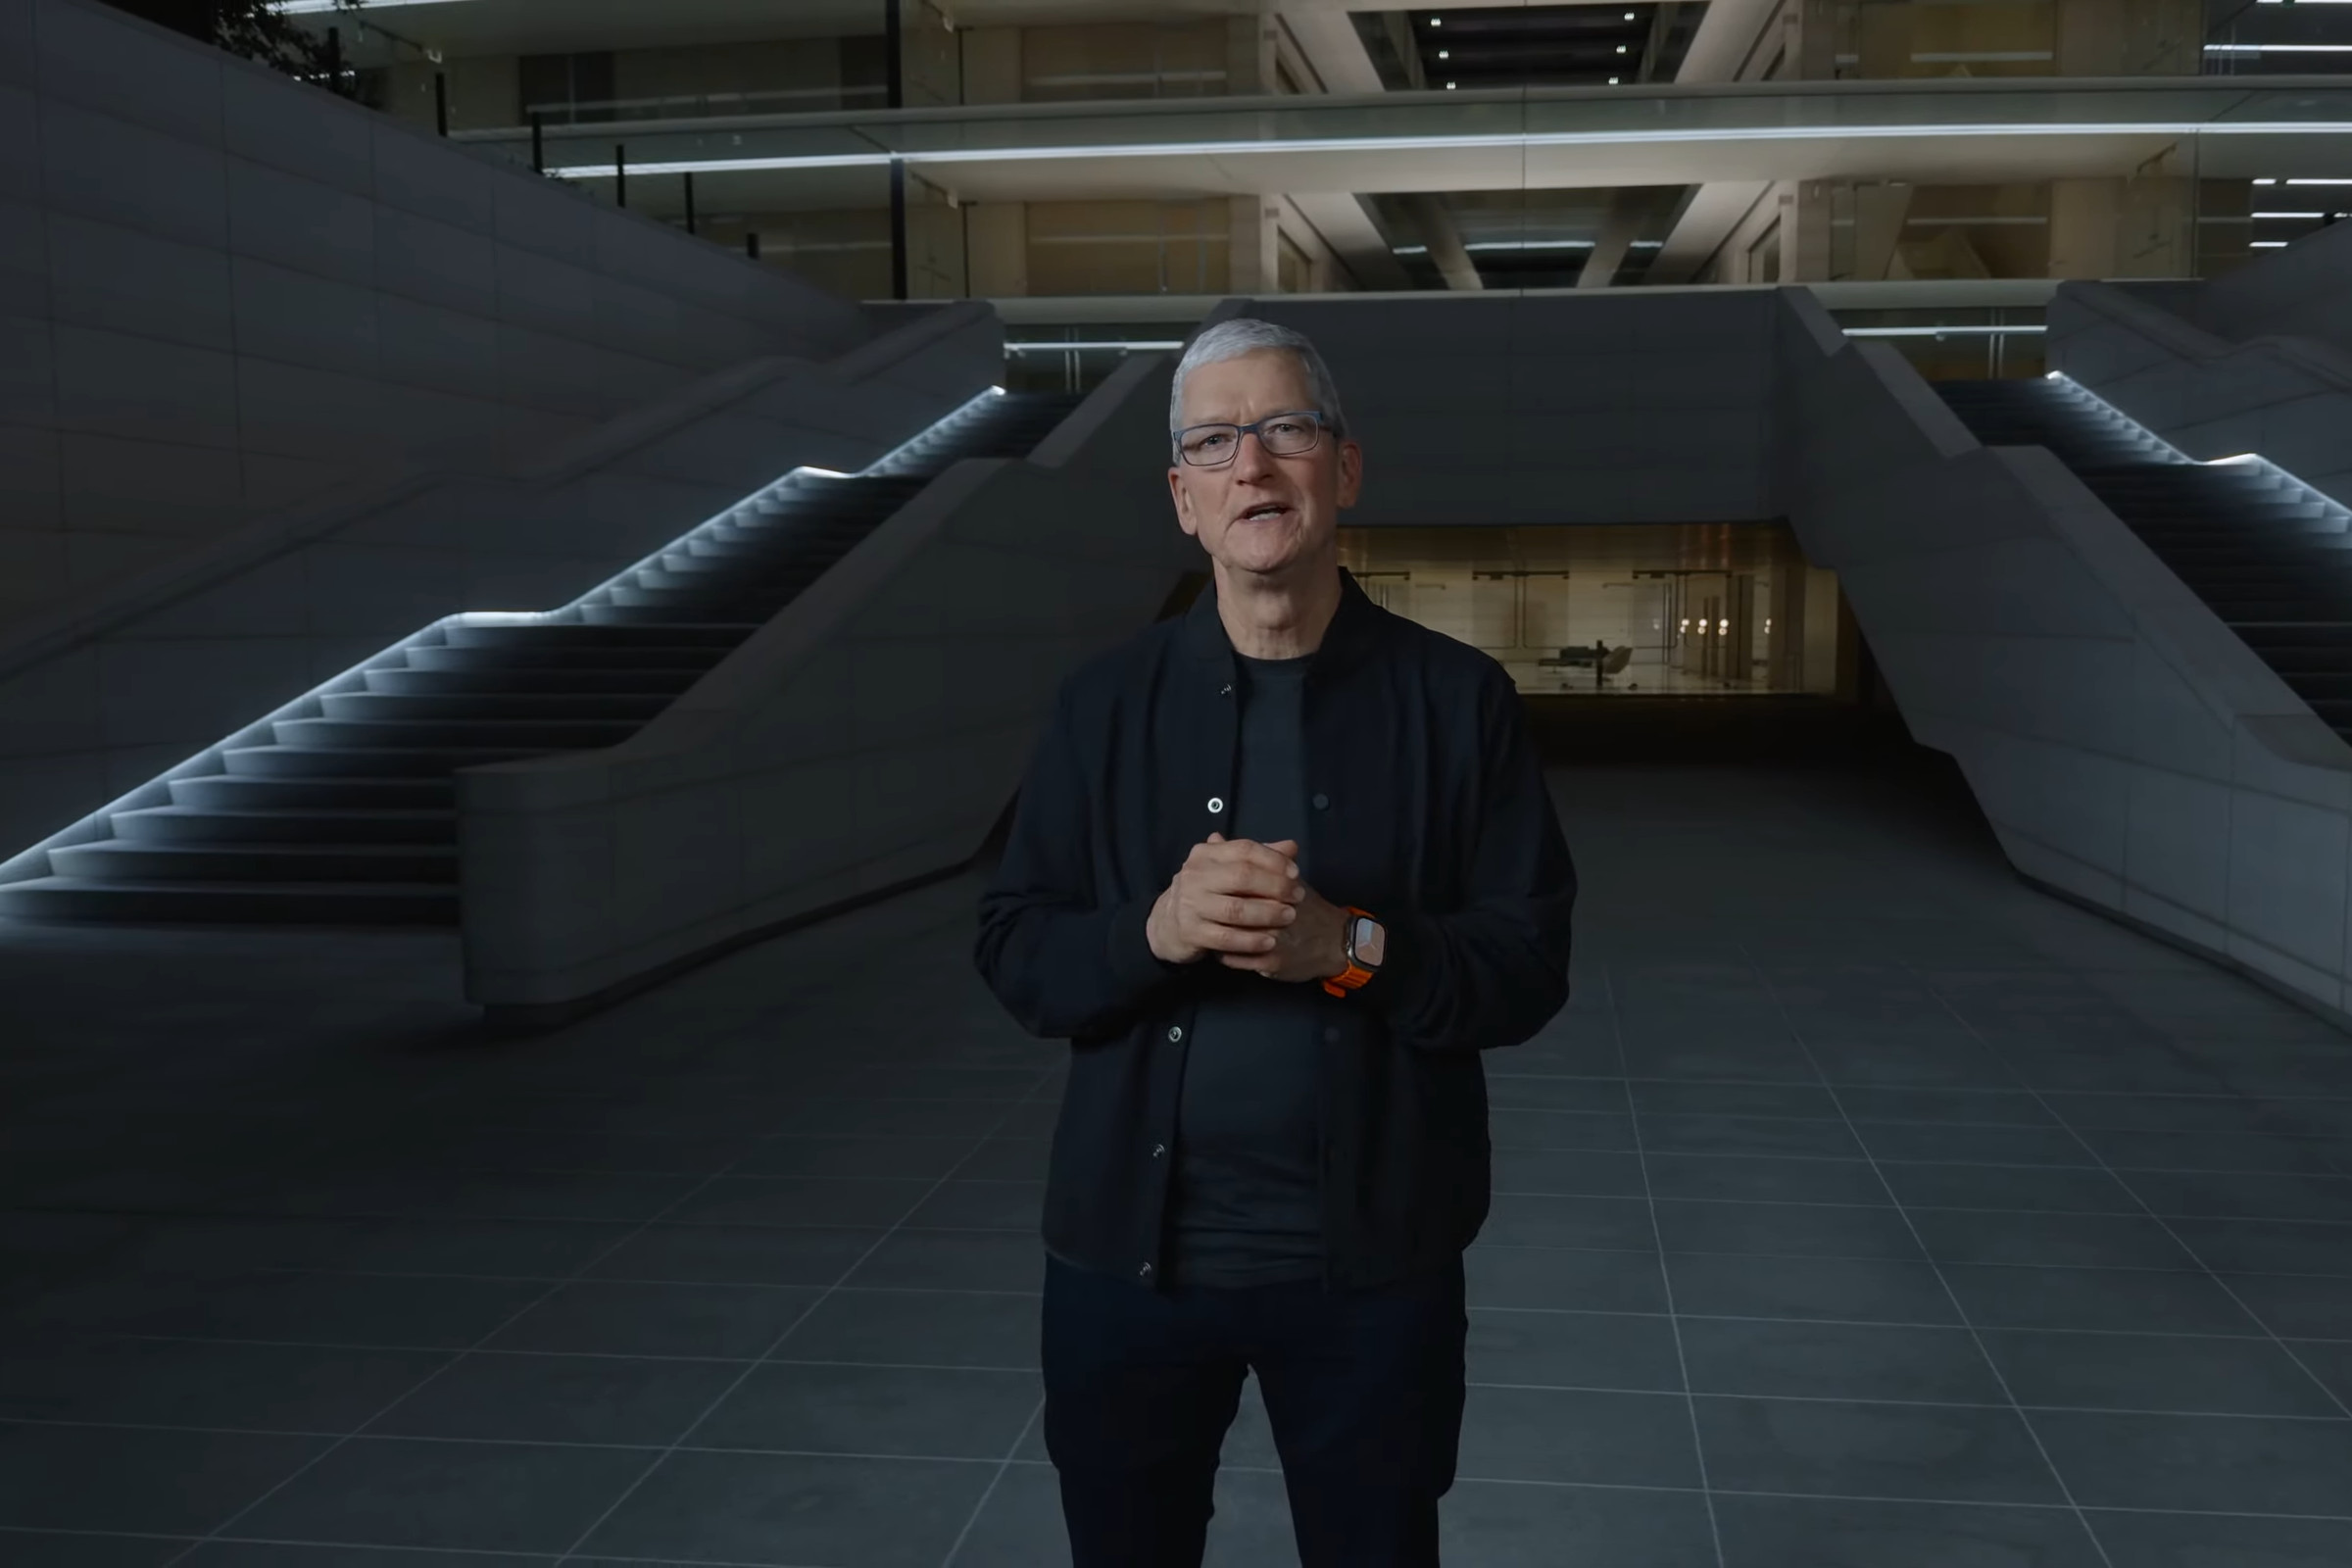 An image showing Apple CEO Tim Cook